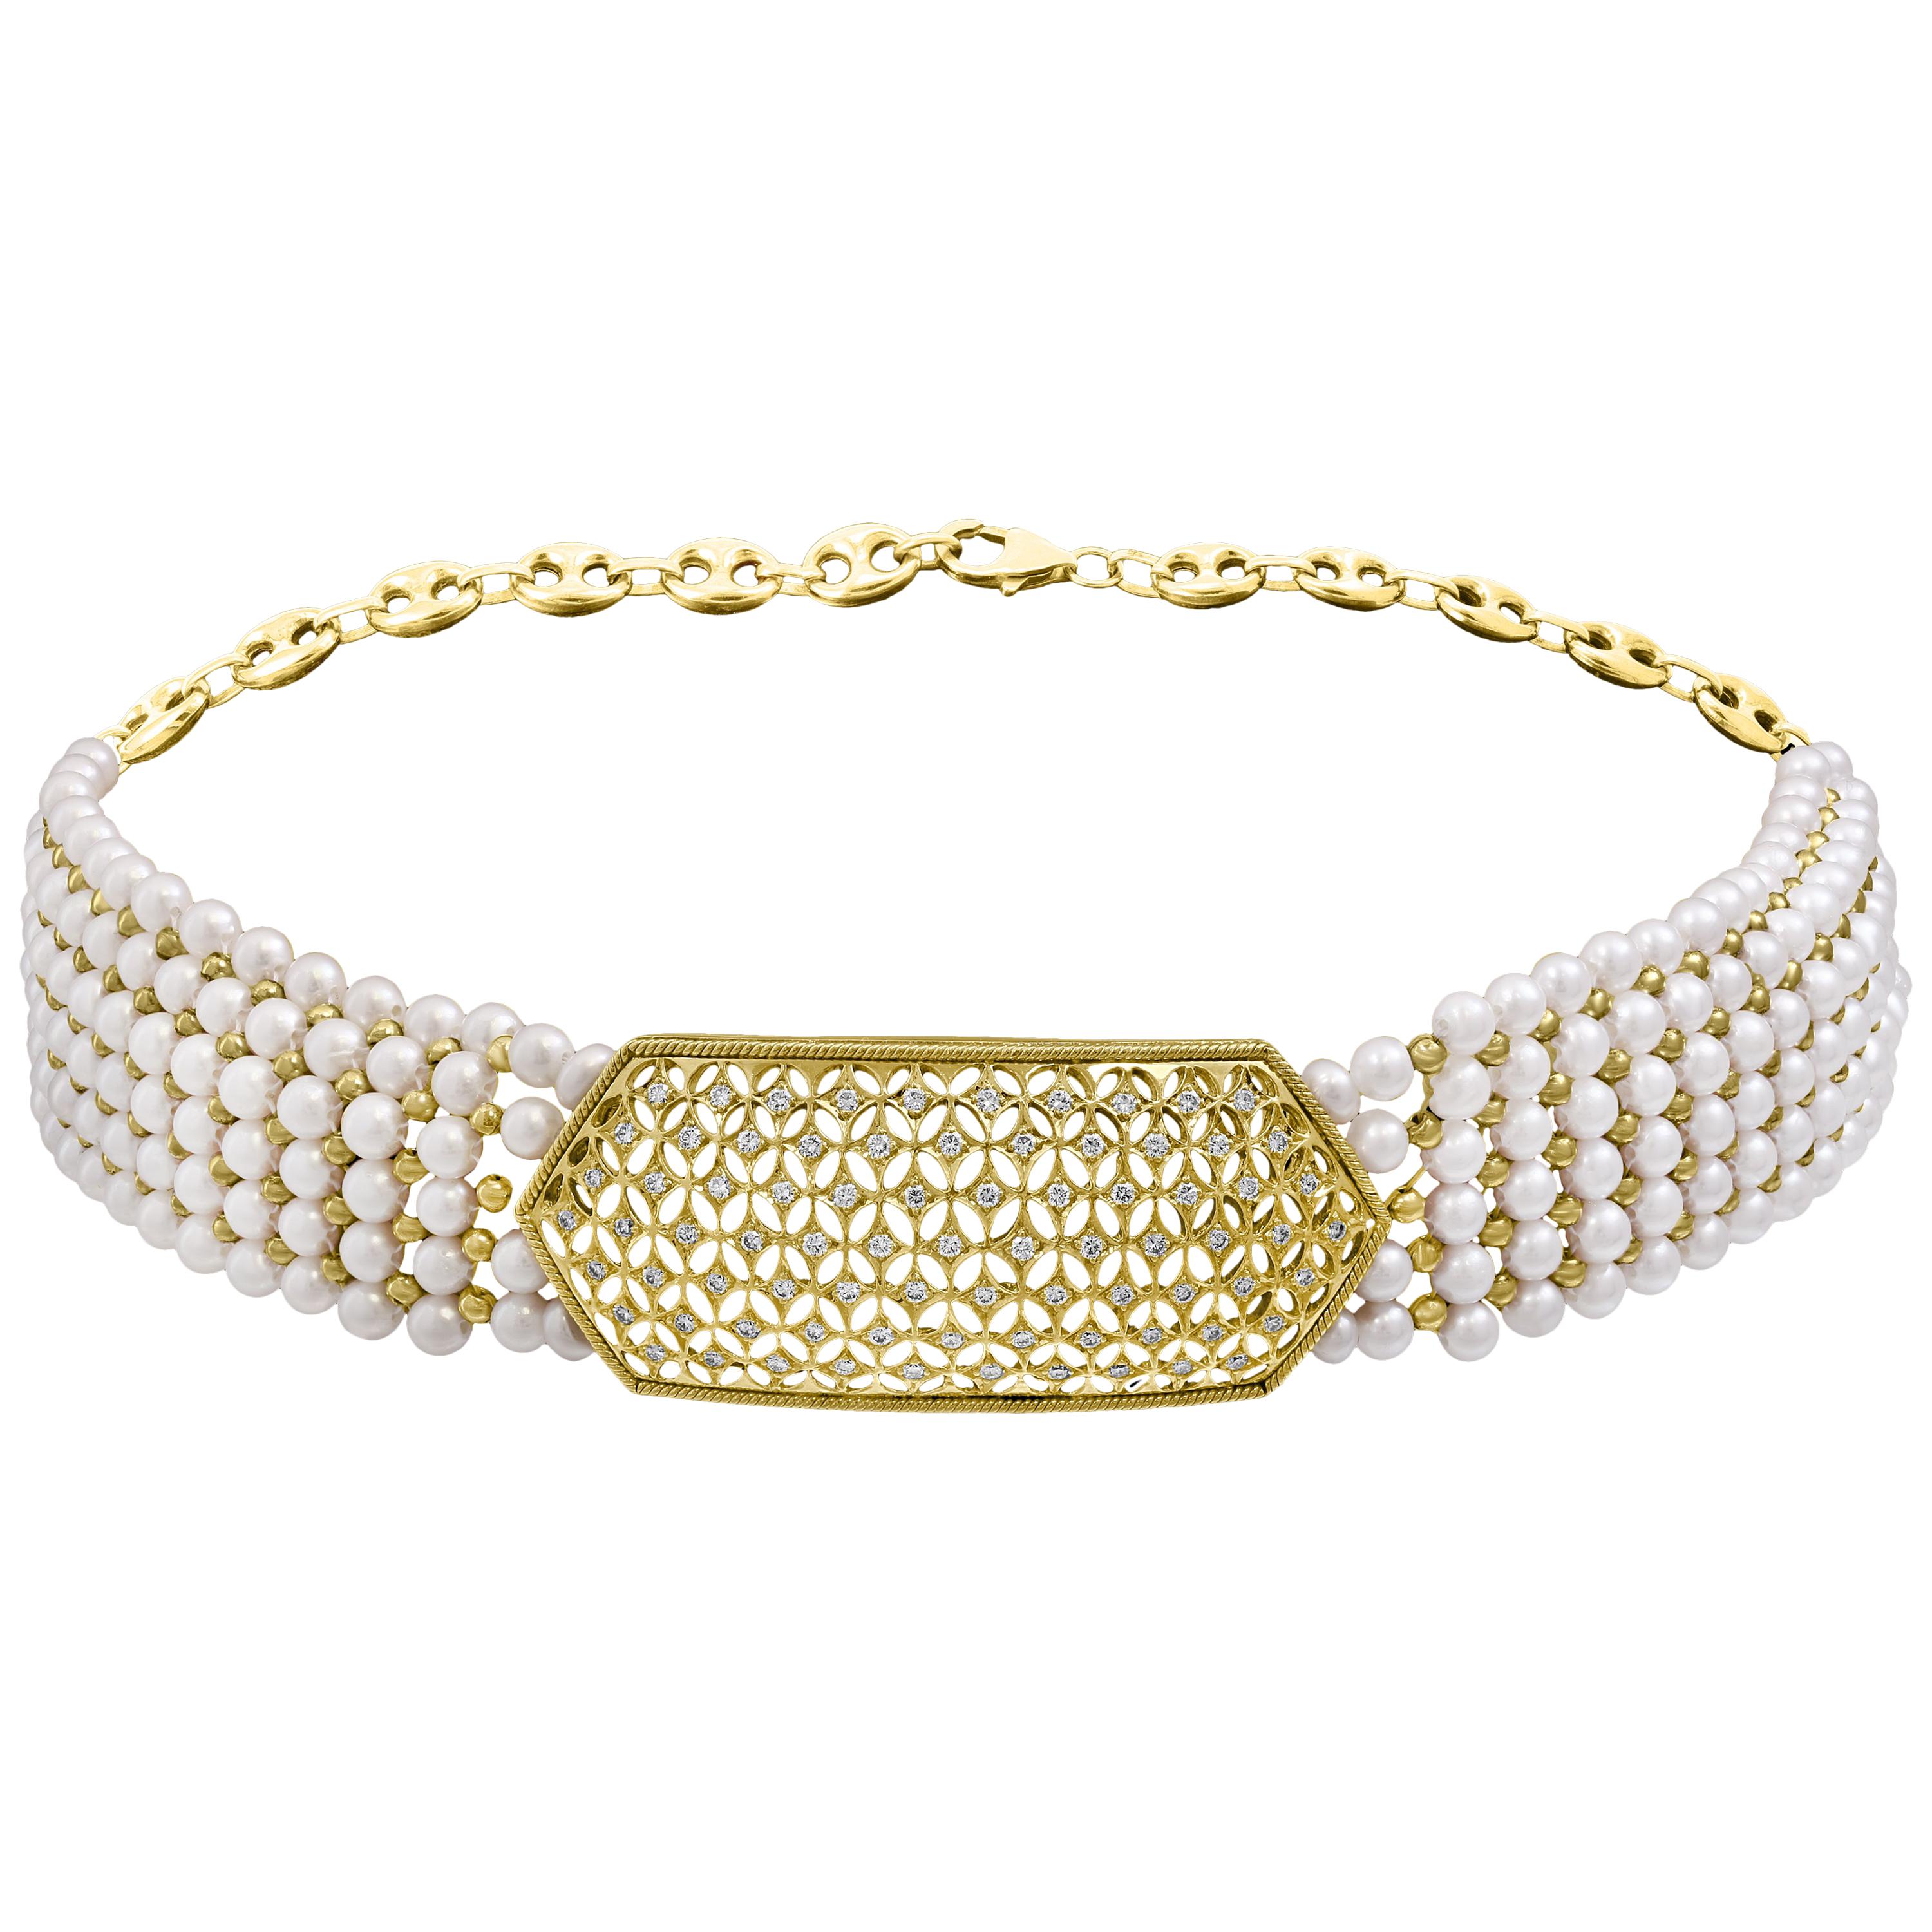 Antique Diamond Choker Necklace with Pearls, 18 Karat Yellow Gold Bridal